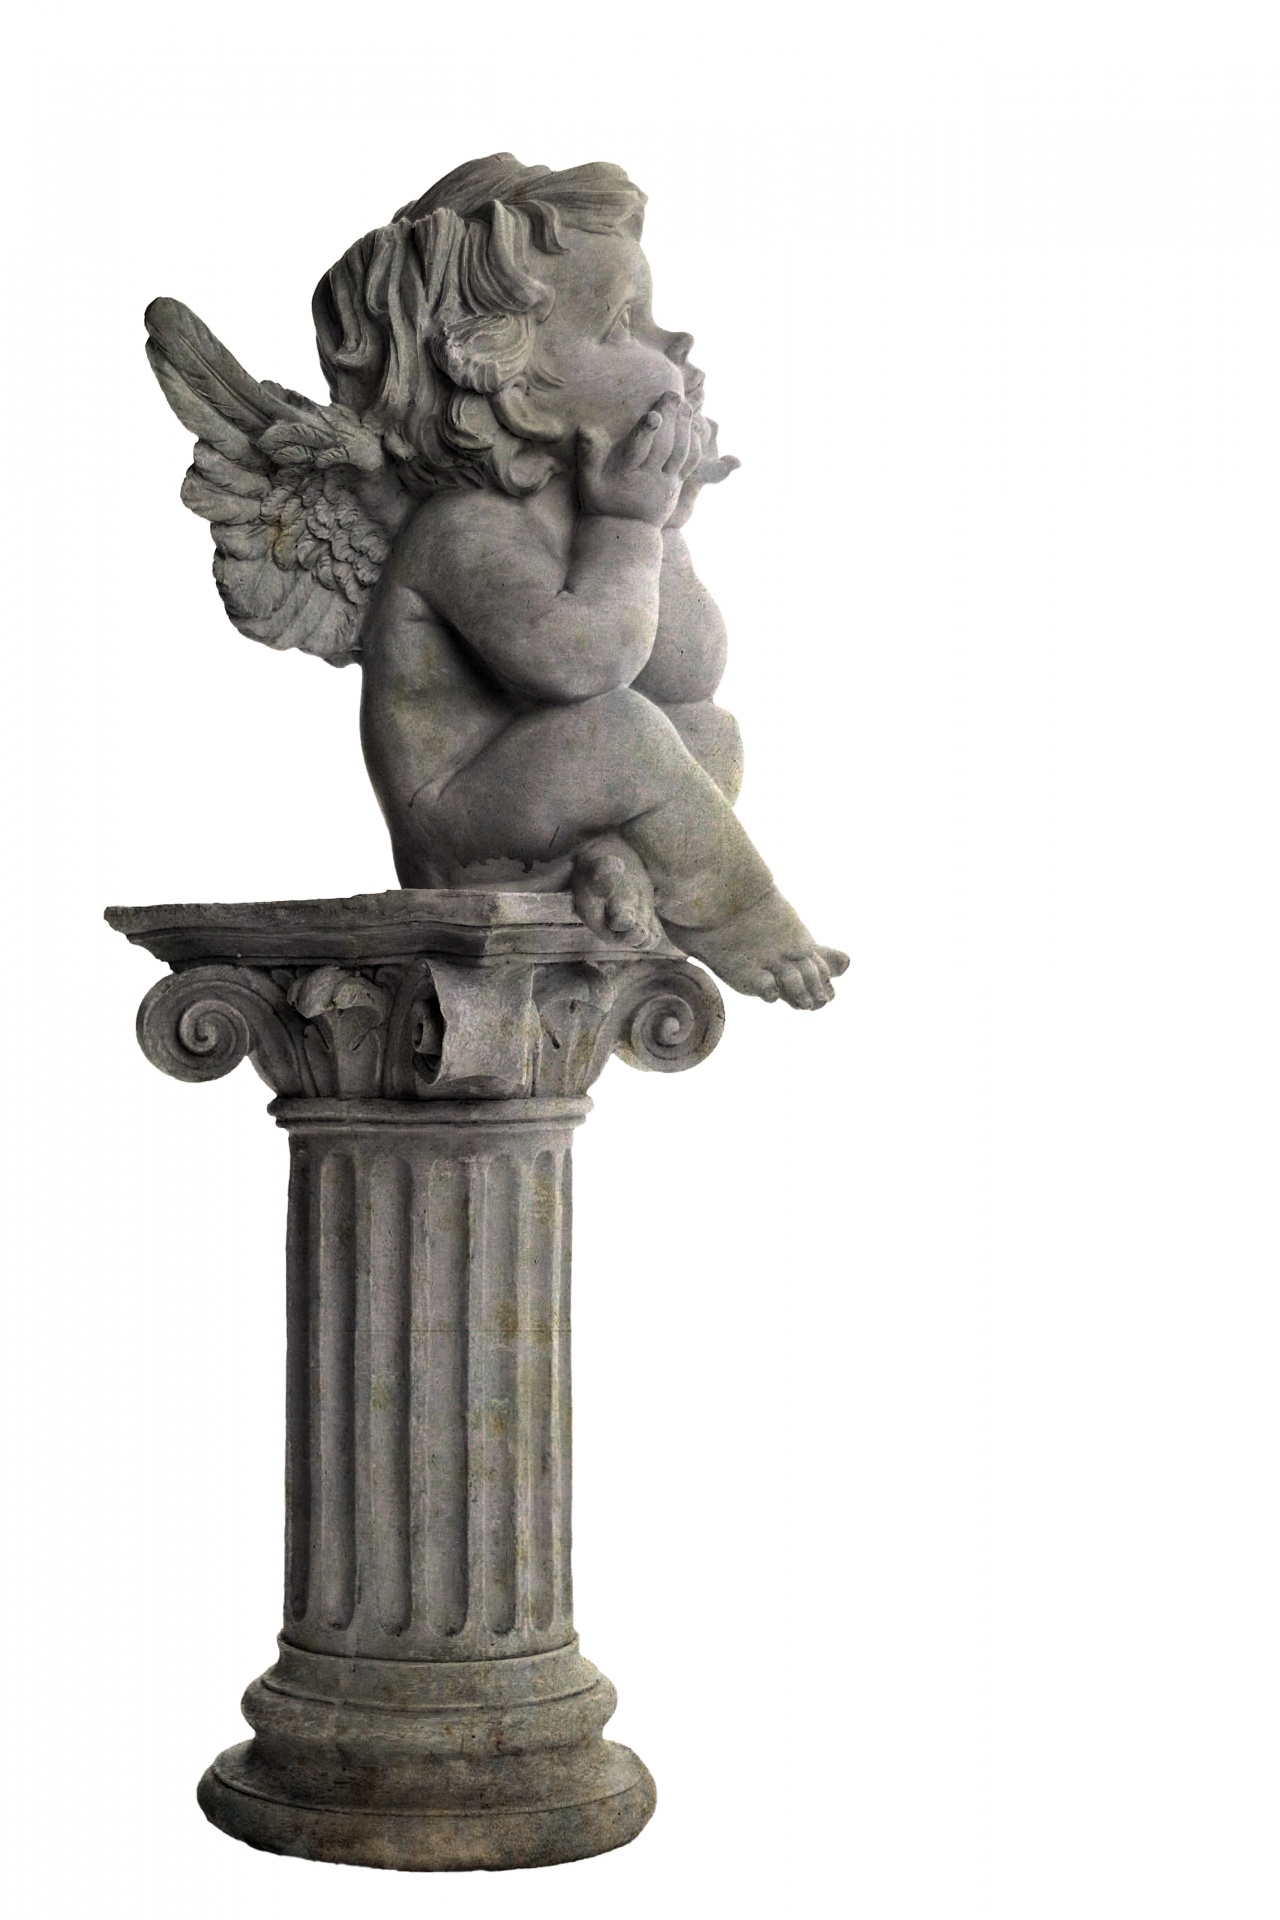 Angel Statue Vintage Old Free Stock Photo - Public Domain Pictures